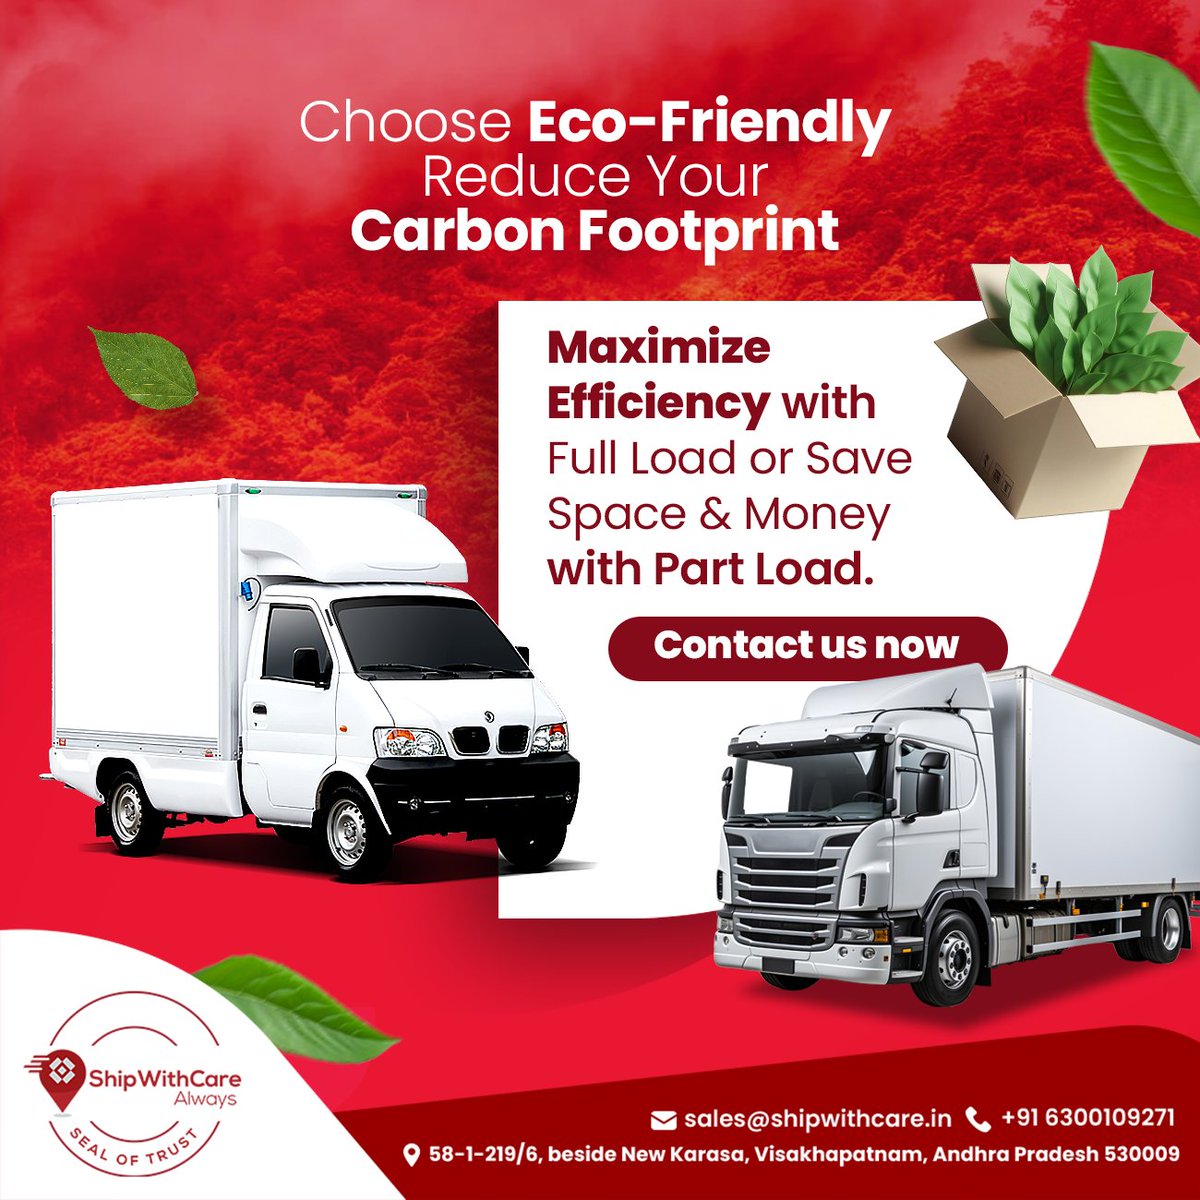 Making eco-friendly choices: Conscious of your carbon footprint? Both options have their perks! Full load maximizes efficiency, while part load reduces wasted space & money. Choose what aligns with your sustainability goals!

#EcoFriendlyTransport #SustainableShipping